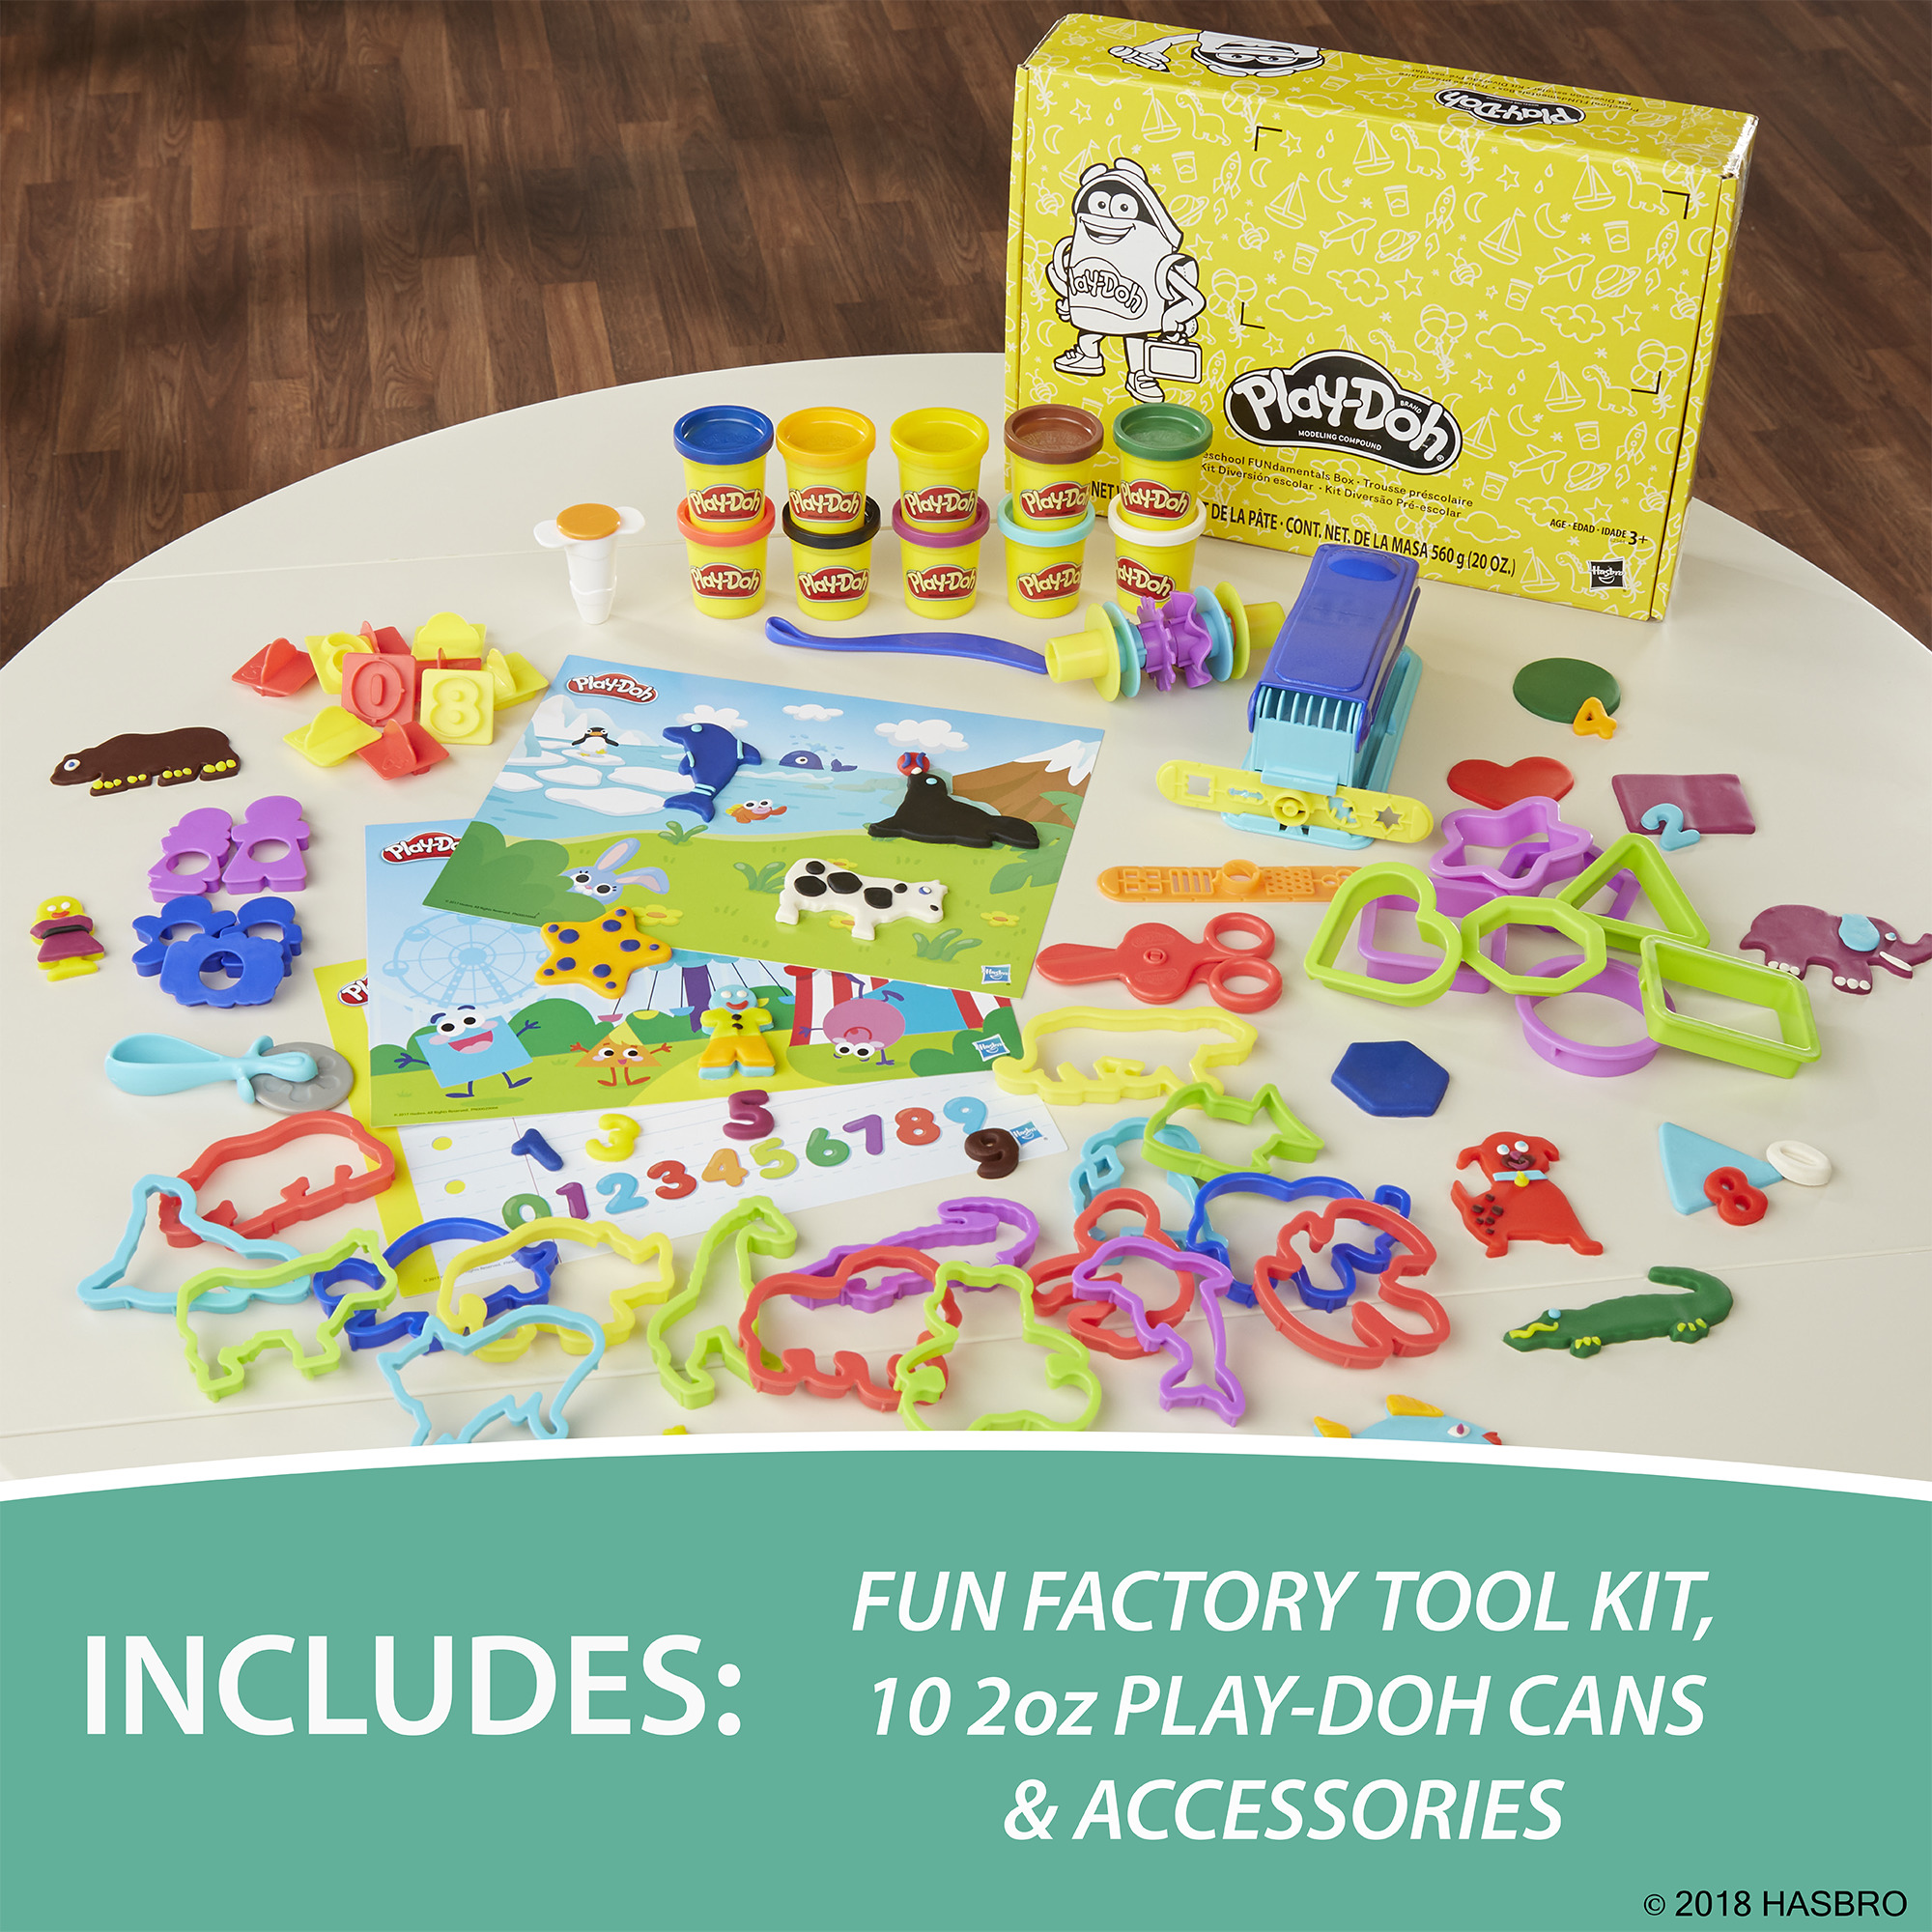 Play-Doh Pre-School Fundamentals Box Playset with 10 Cans & 50+ Tools - image 5 of 10